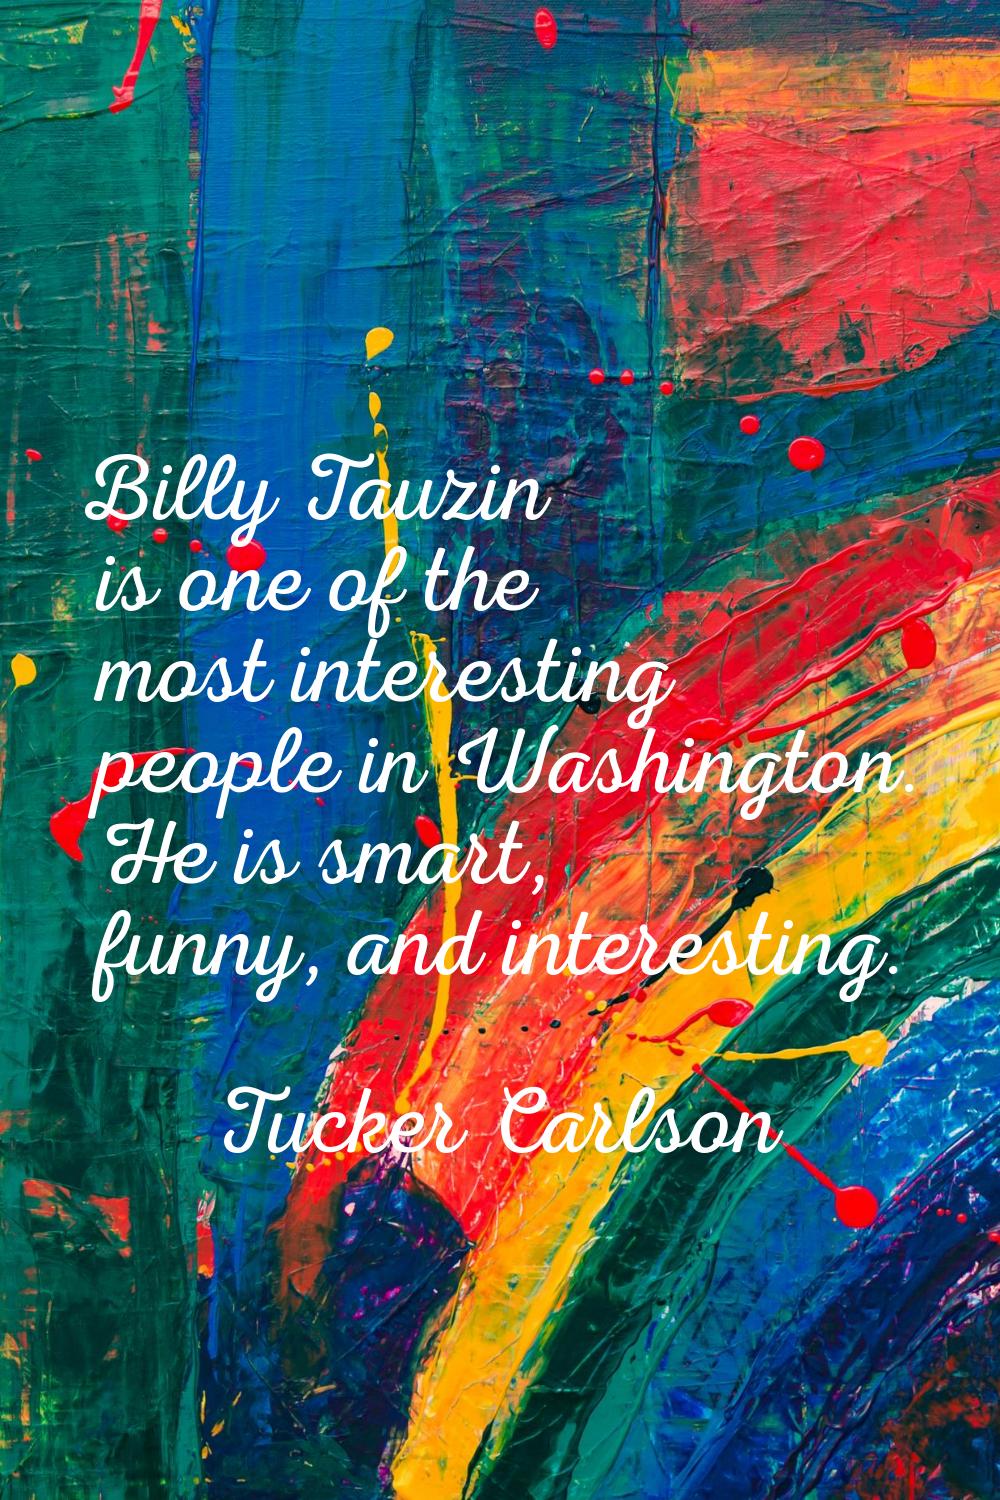 Billy Tauzin is one of the most interesting people in Washington. He is smart, funny, and interesti